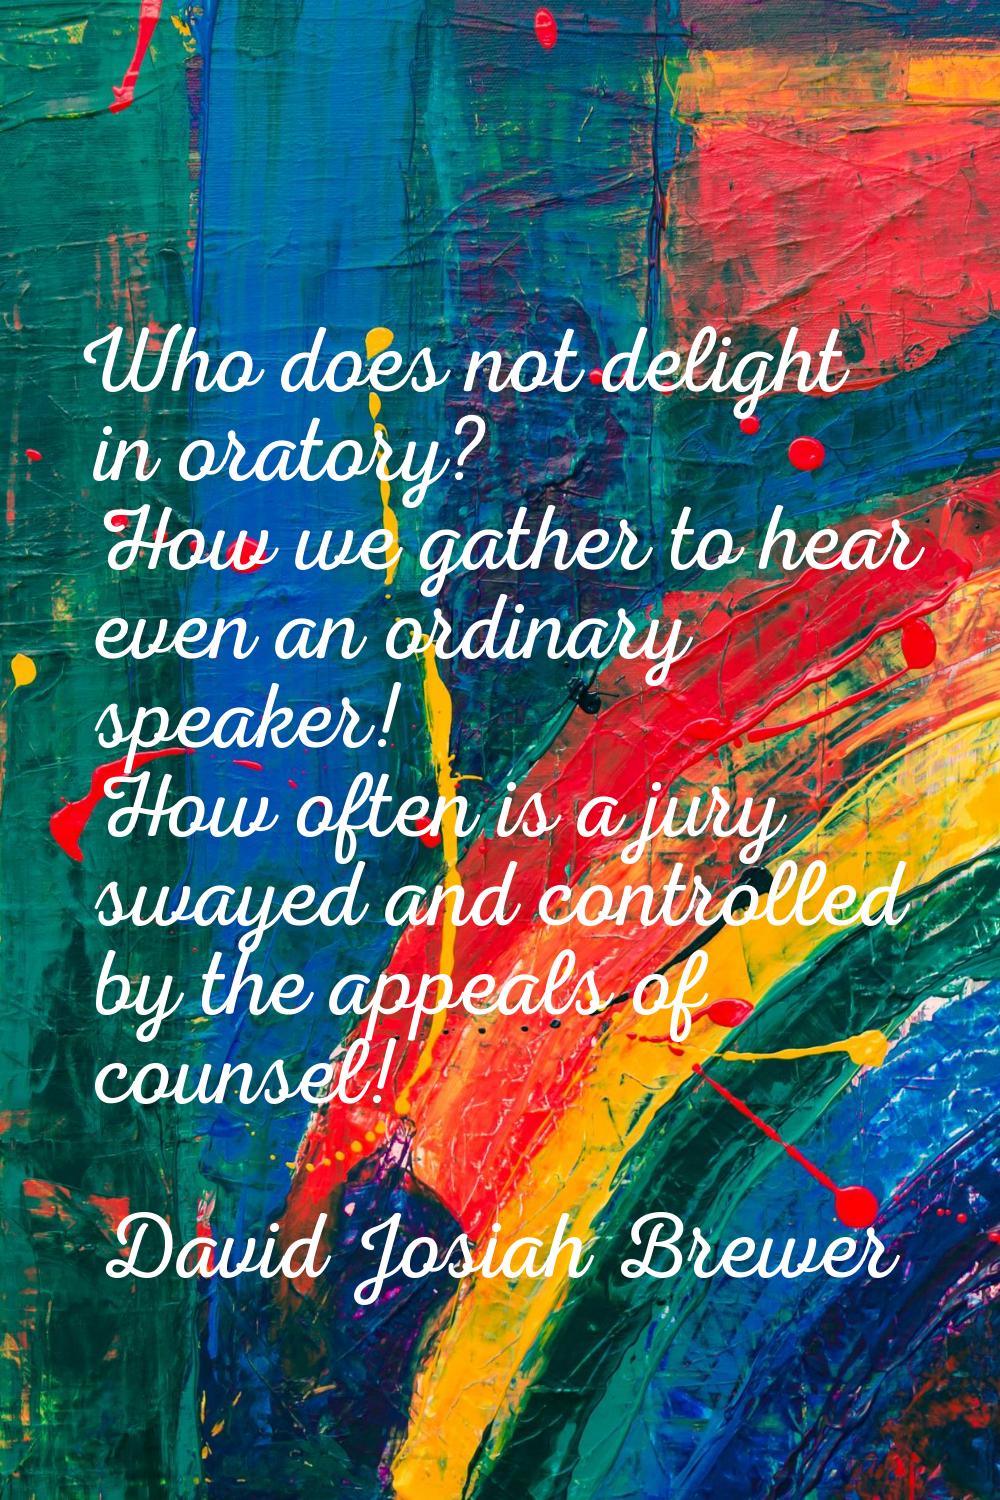 Who does not delight in oratory? How we gather to hear even an ordinary speaker! How often is a jur